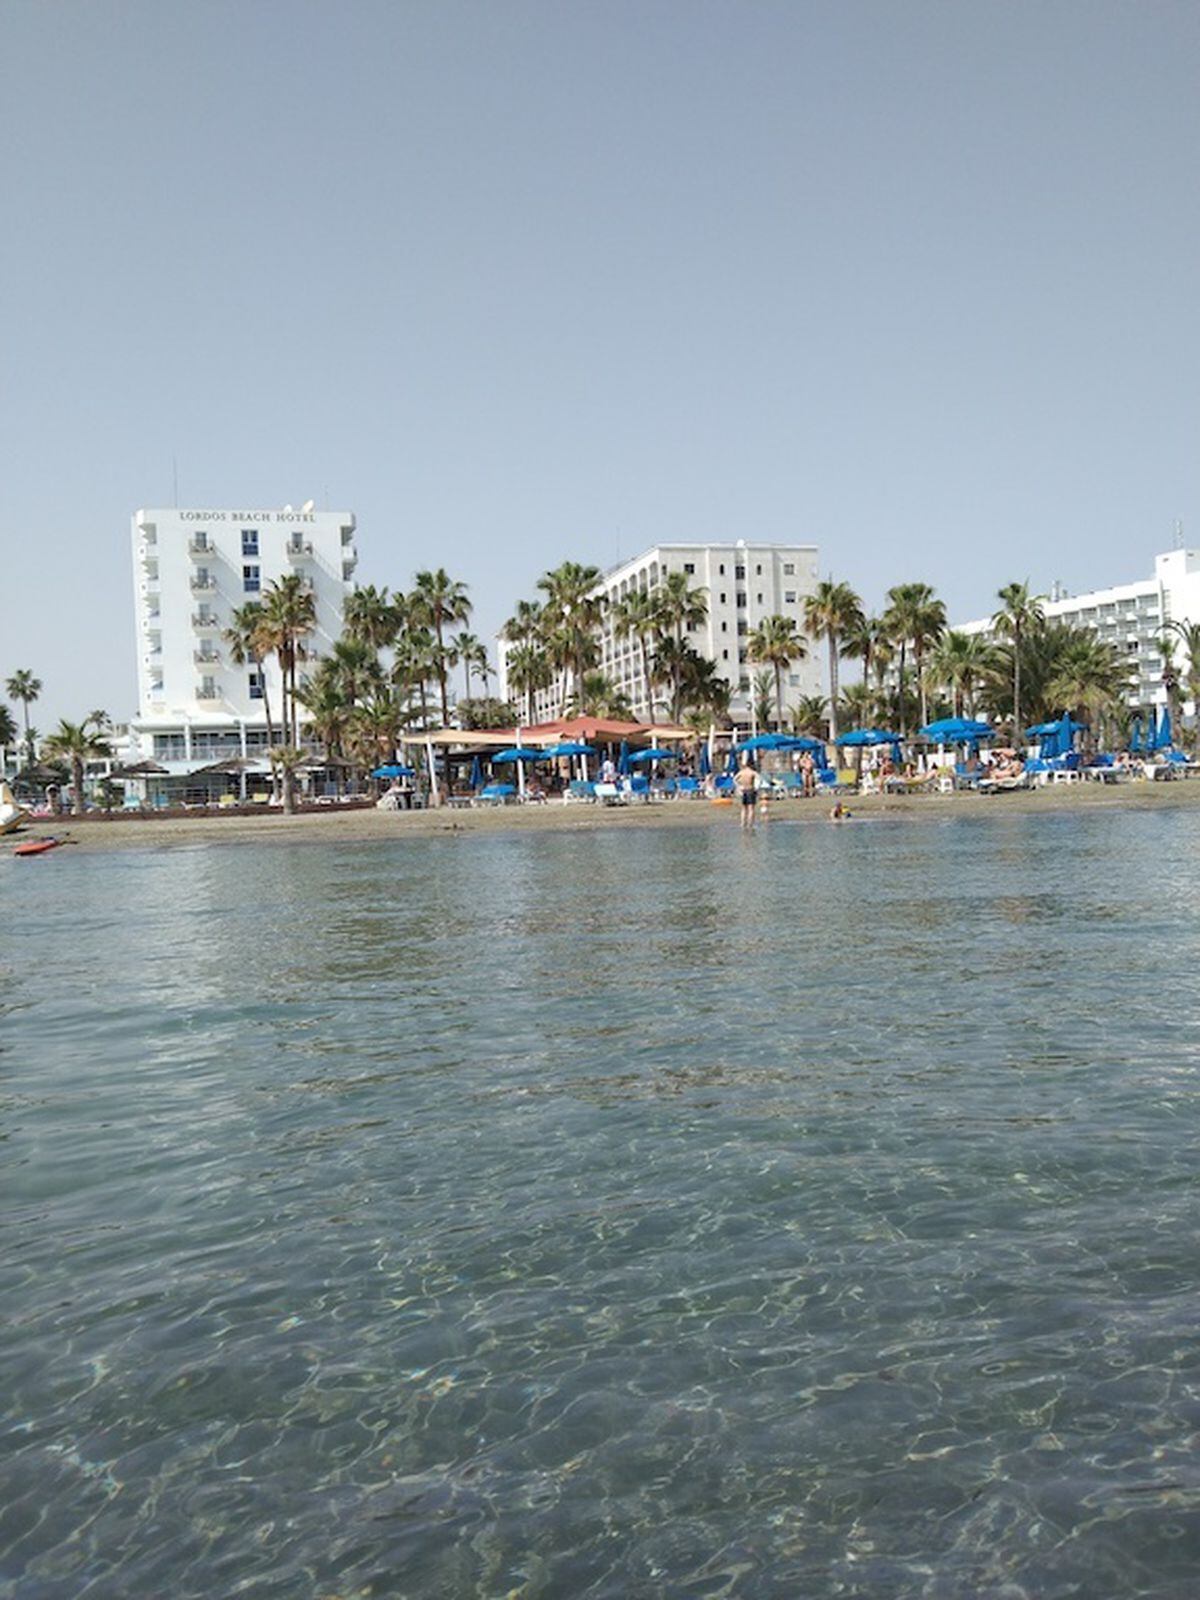 A view of the two hotels from the Mediterranean